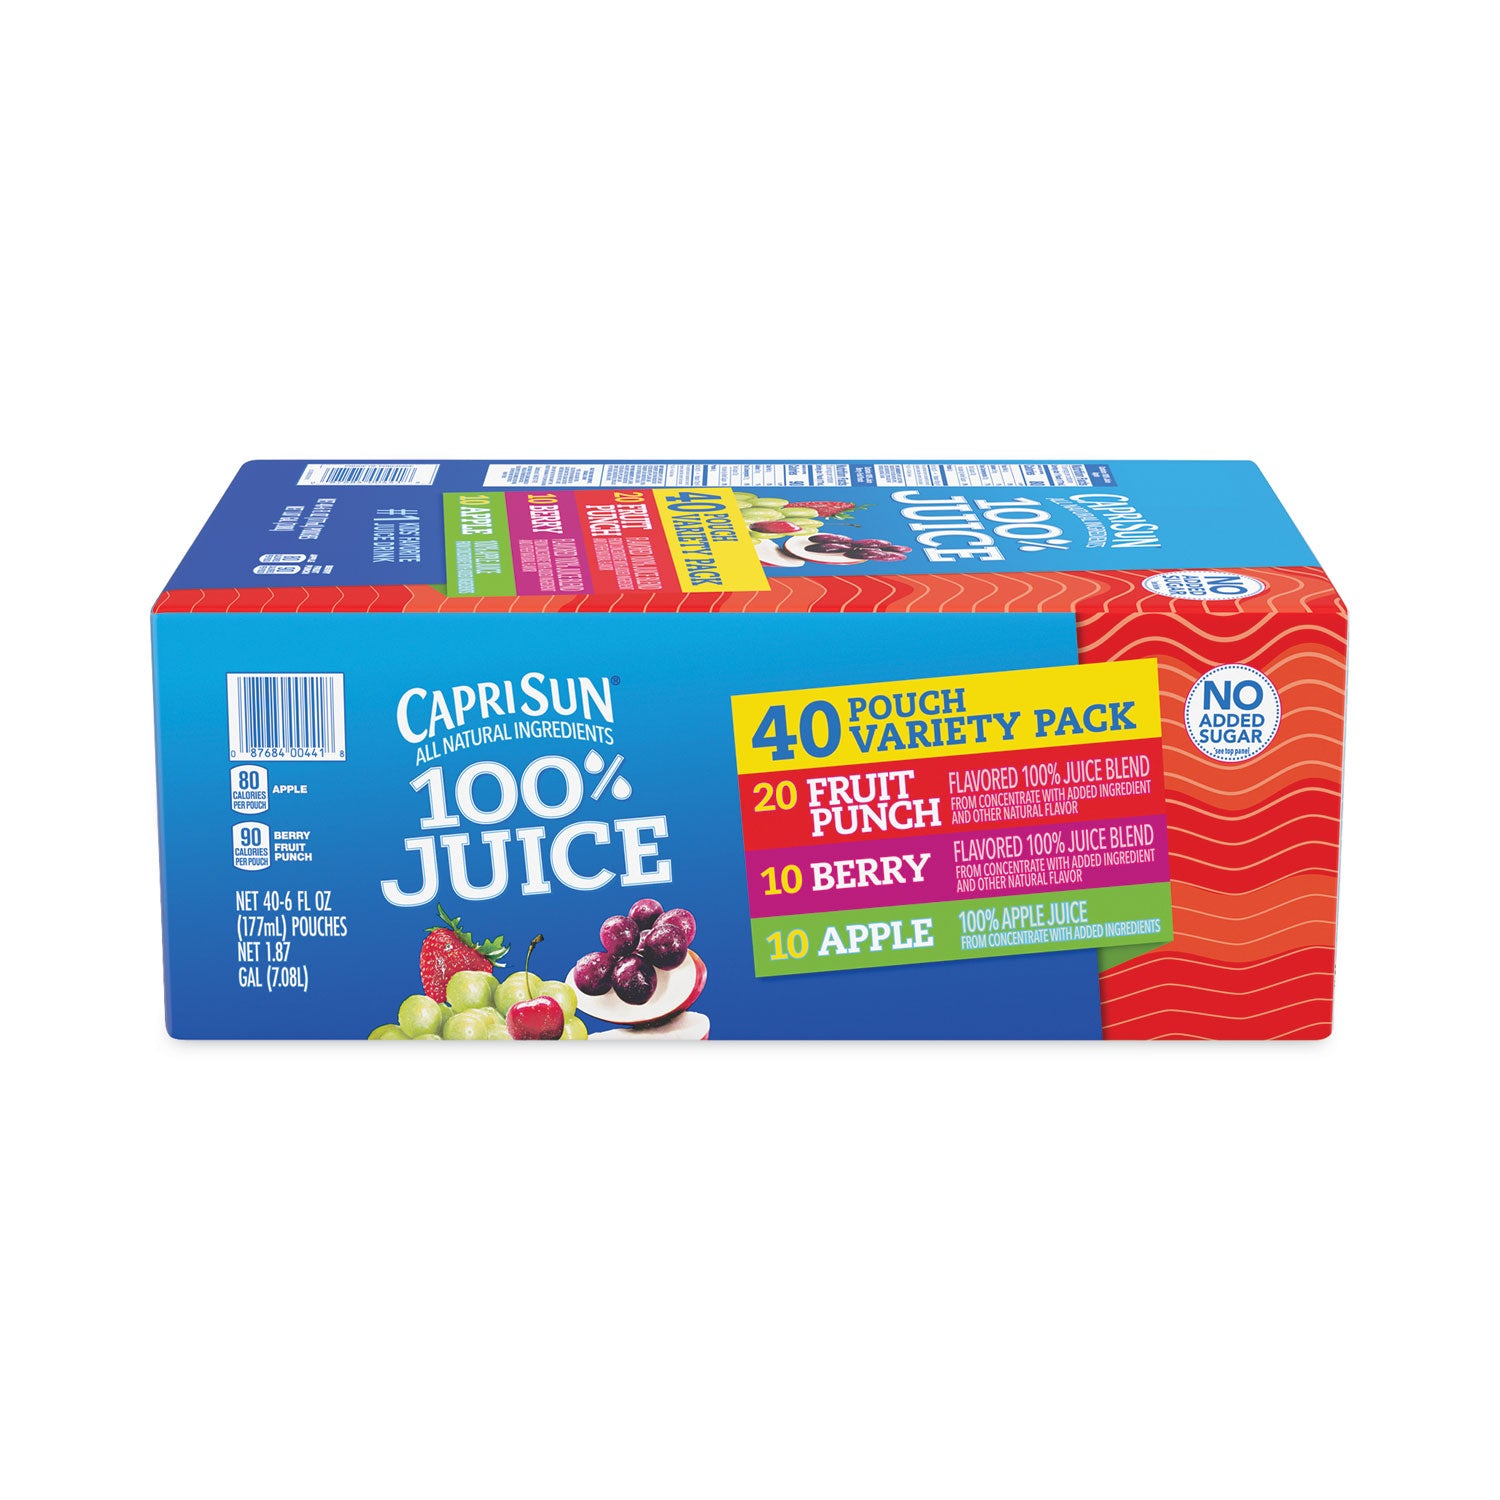 100%-juice-pouches-variety-pack-6-oz-40-pouches-carton-ships-in-1-3-business-days_grr22000720 - 2